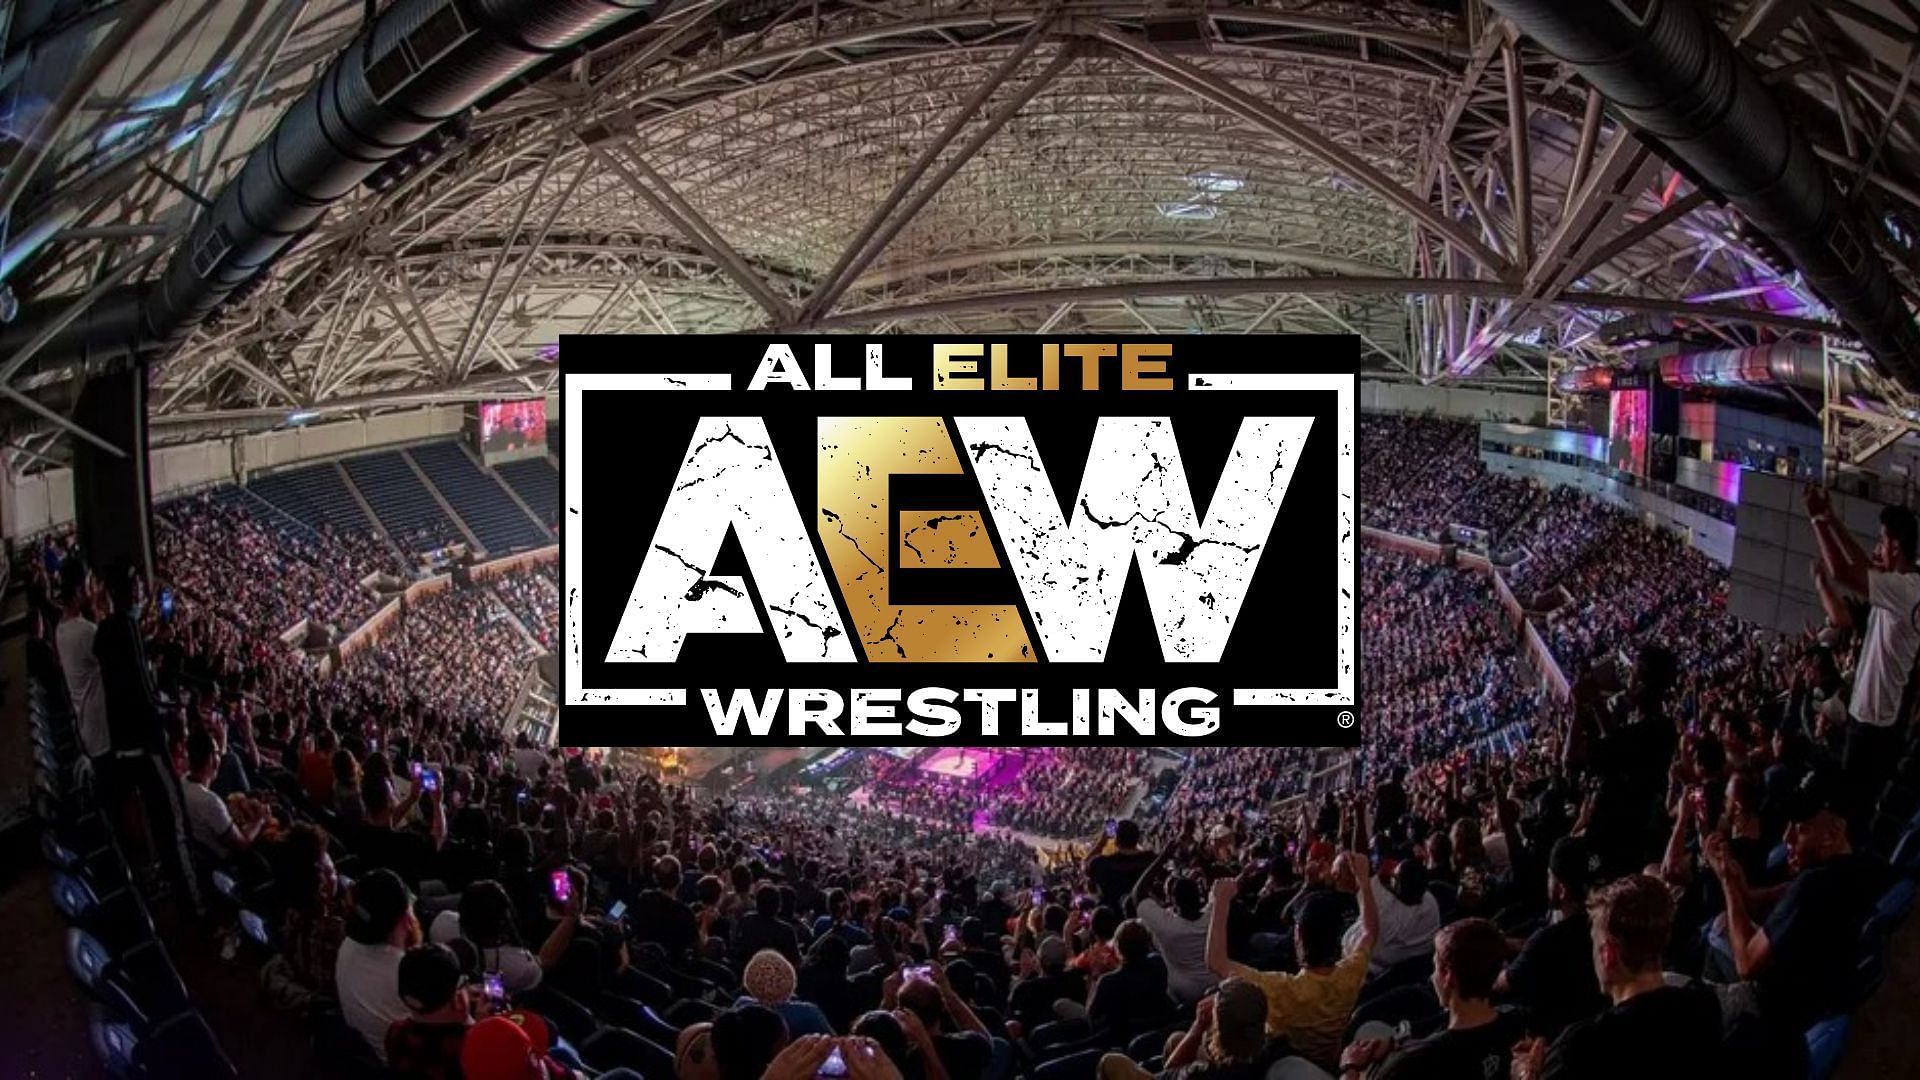 AEW Collision in the newest weekly wrestling show announced by AEW